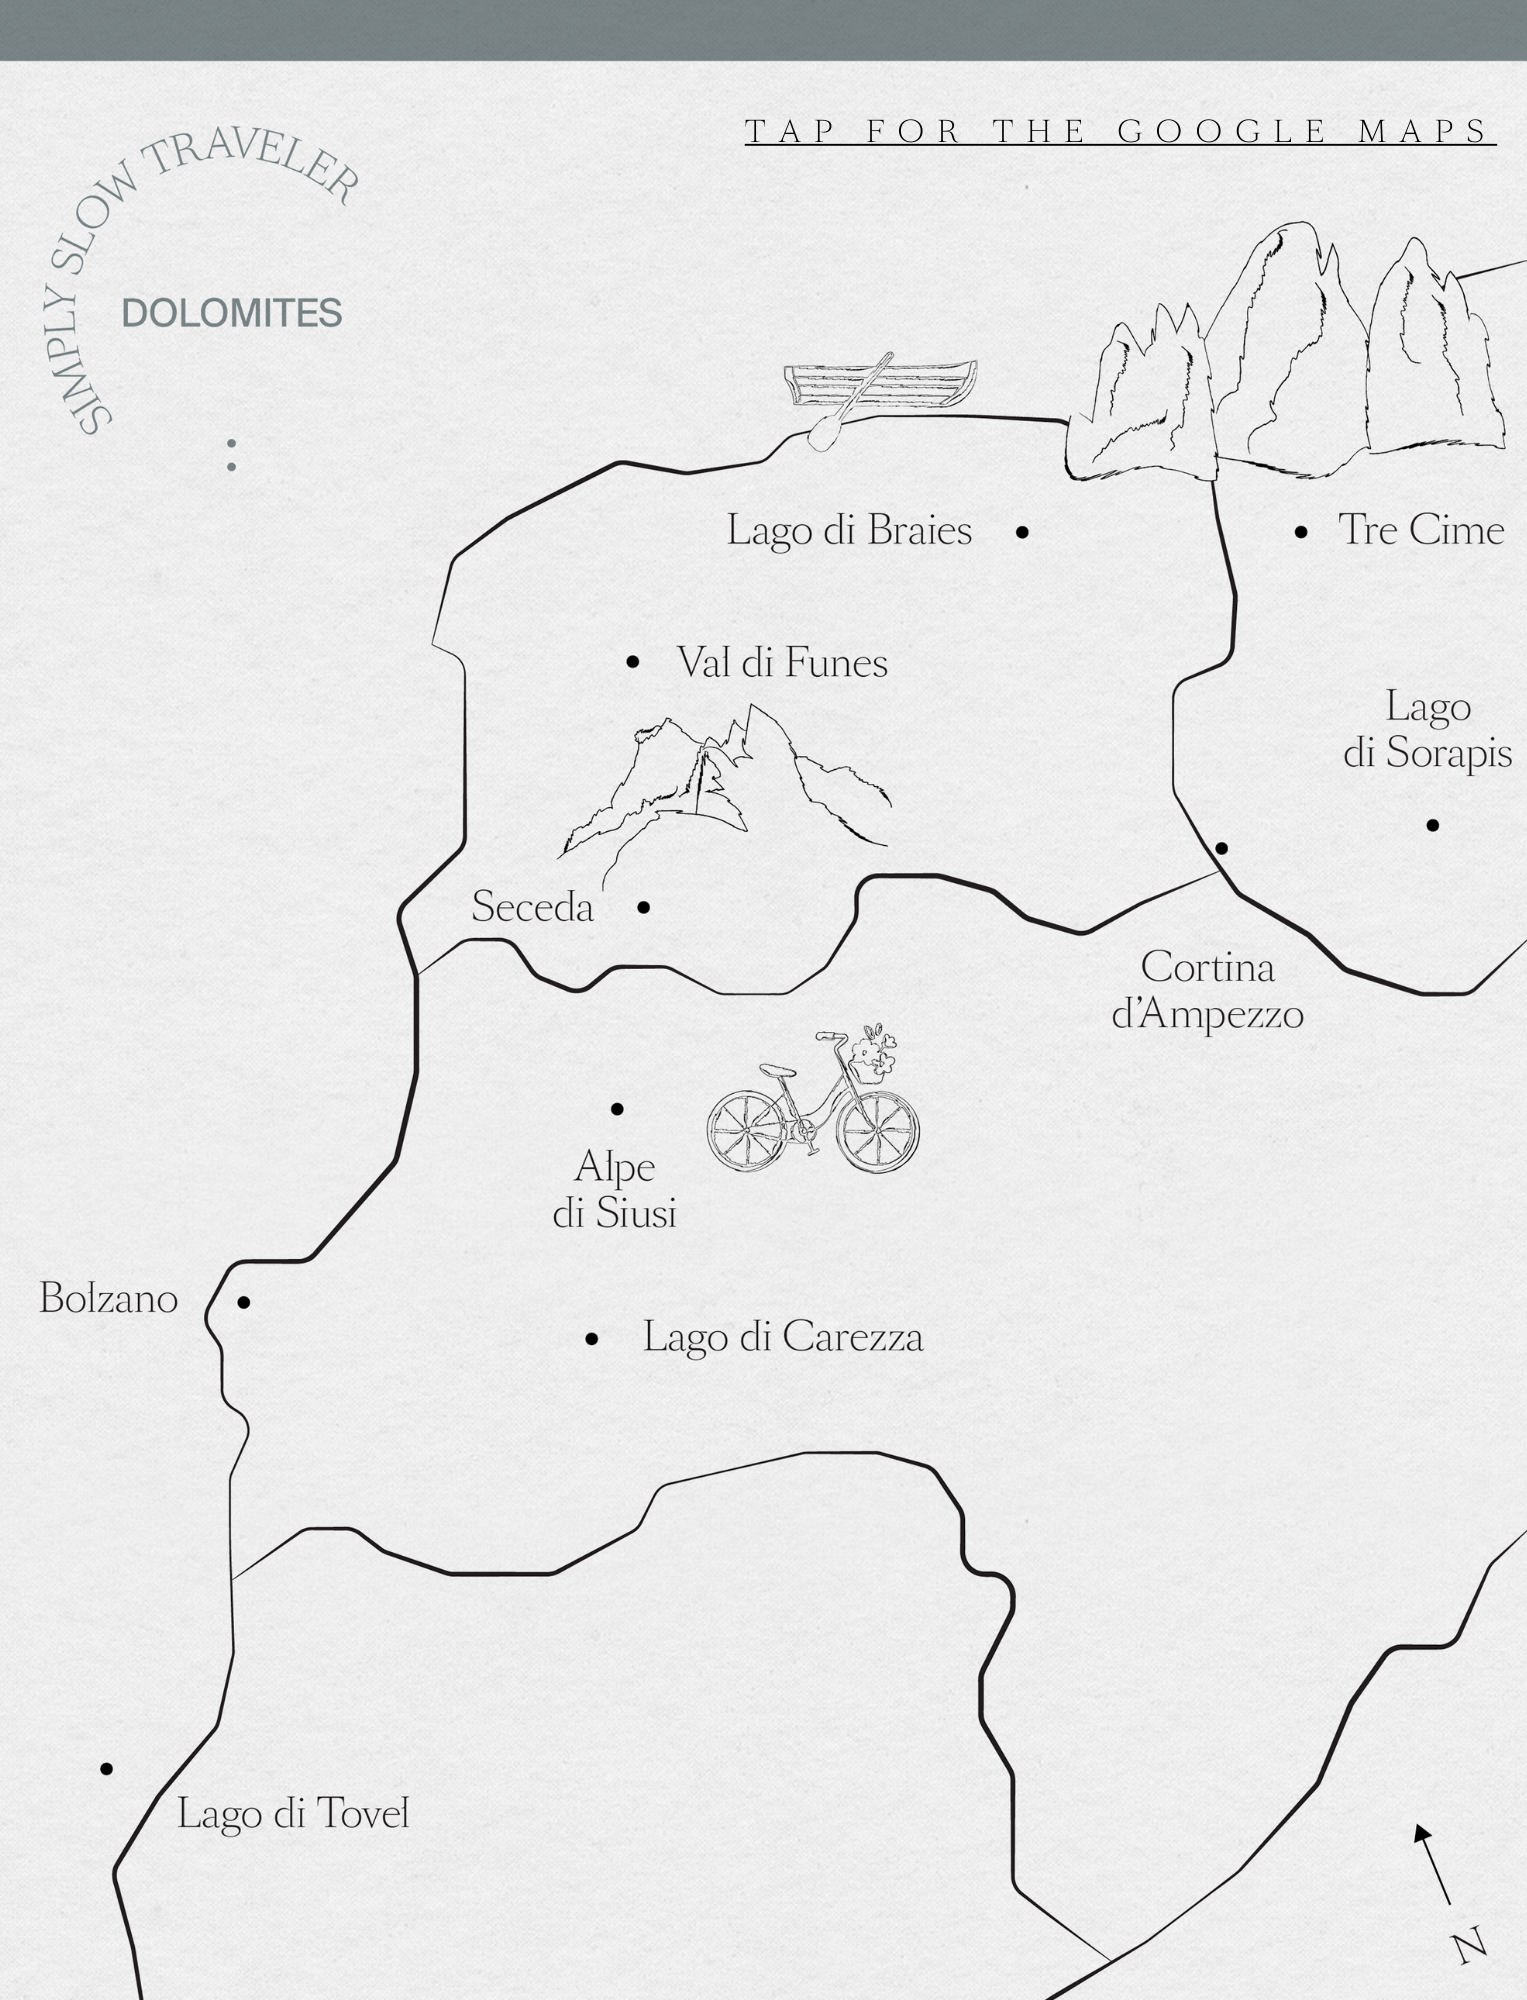 A Guide to the Dolomites - page with Map, by Simply Slow Traveler